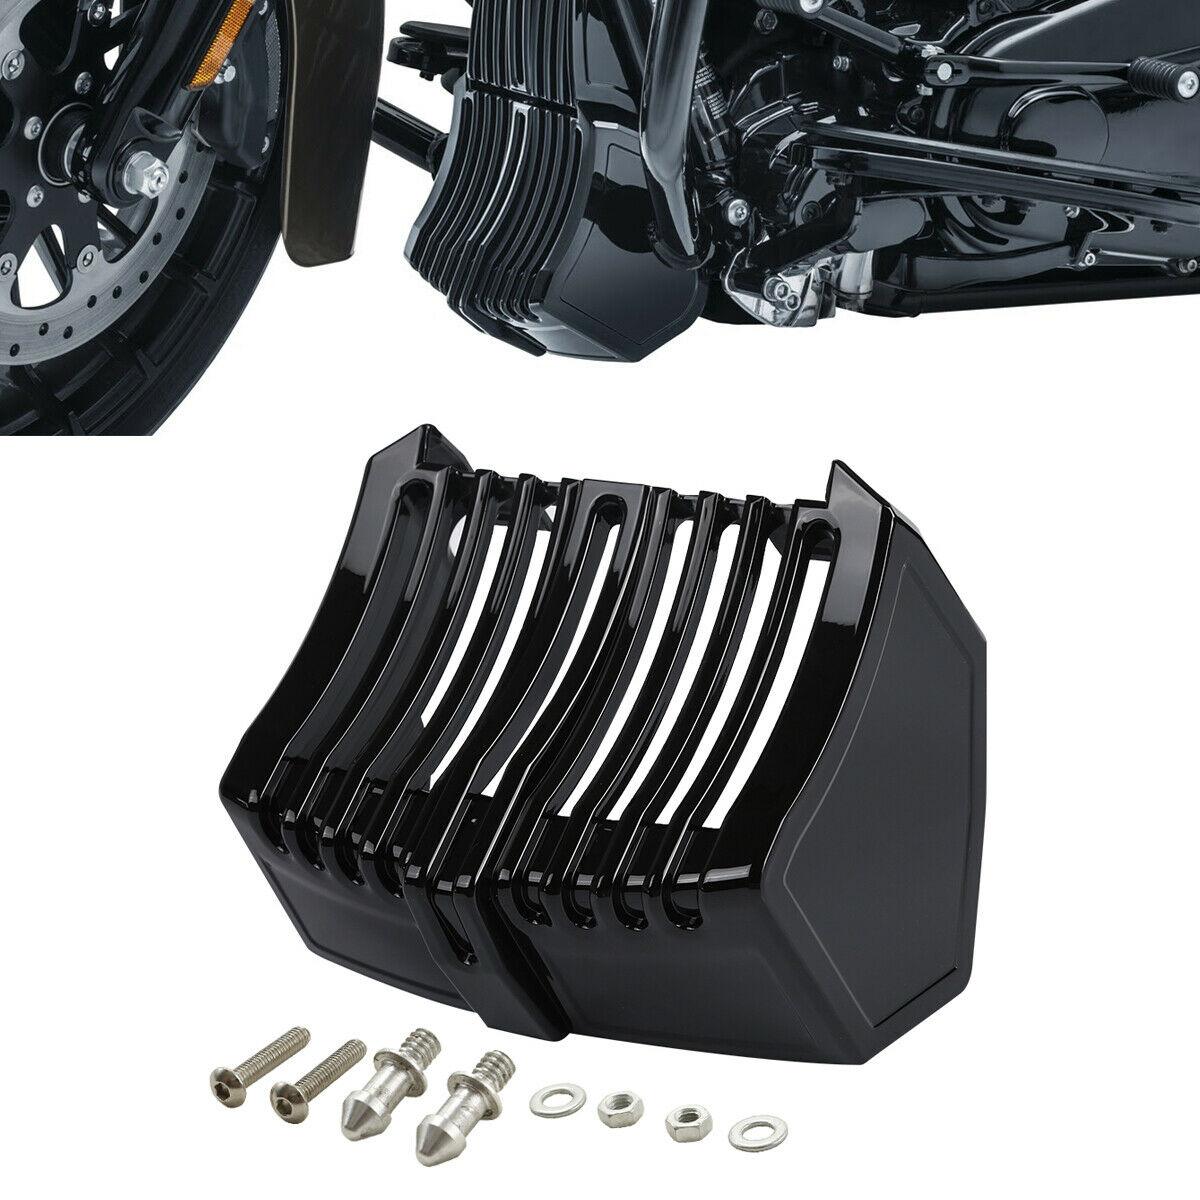 Oil Cooler Cover Trim Accent Fit For Harley Touring Electra Street Road Glide US - Moto Life Products